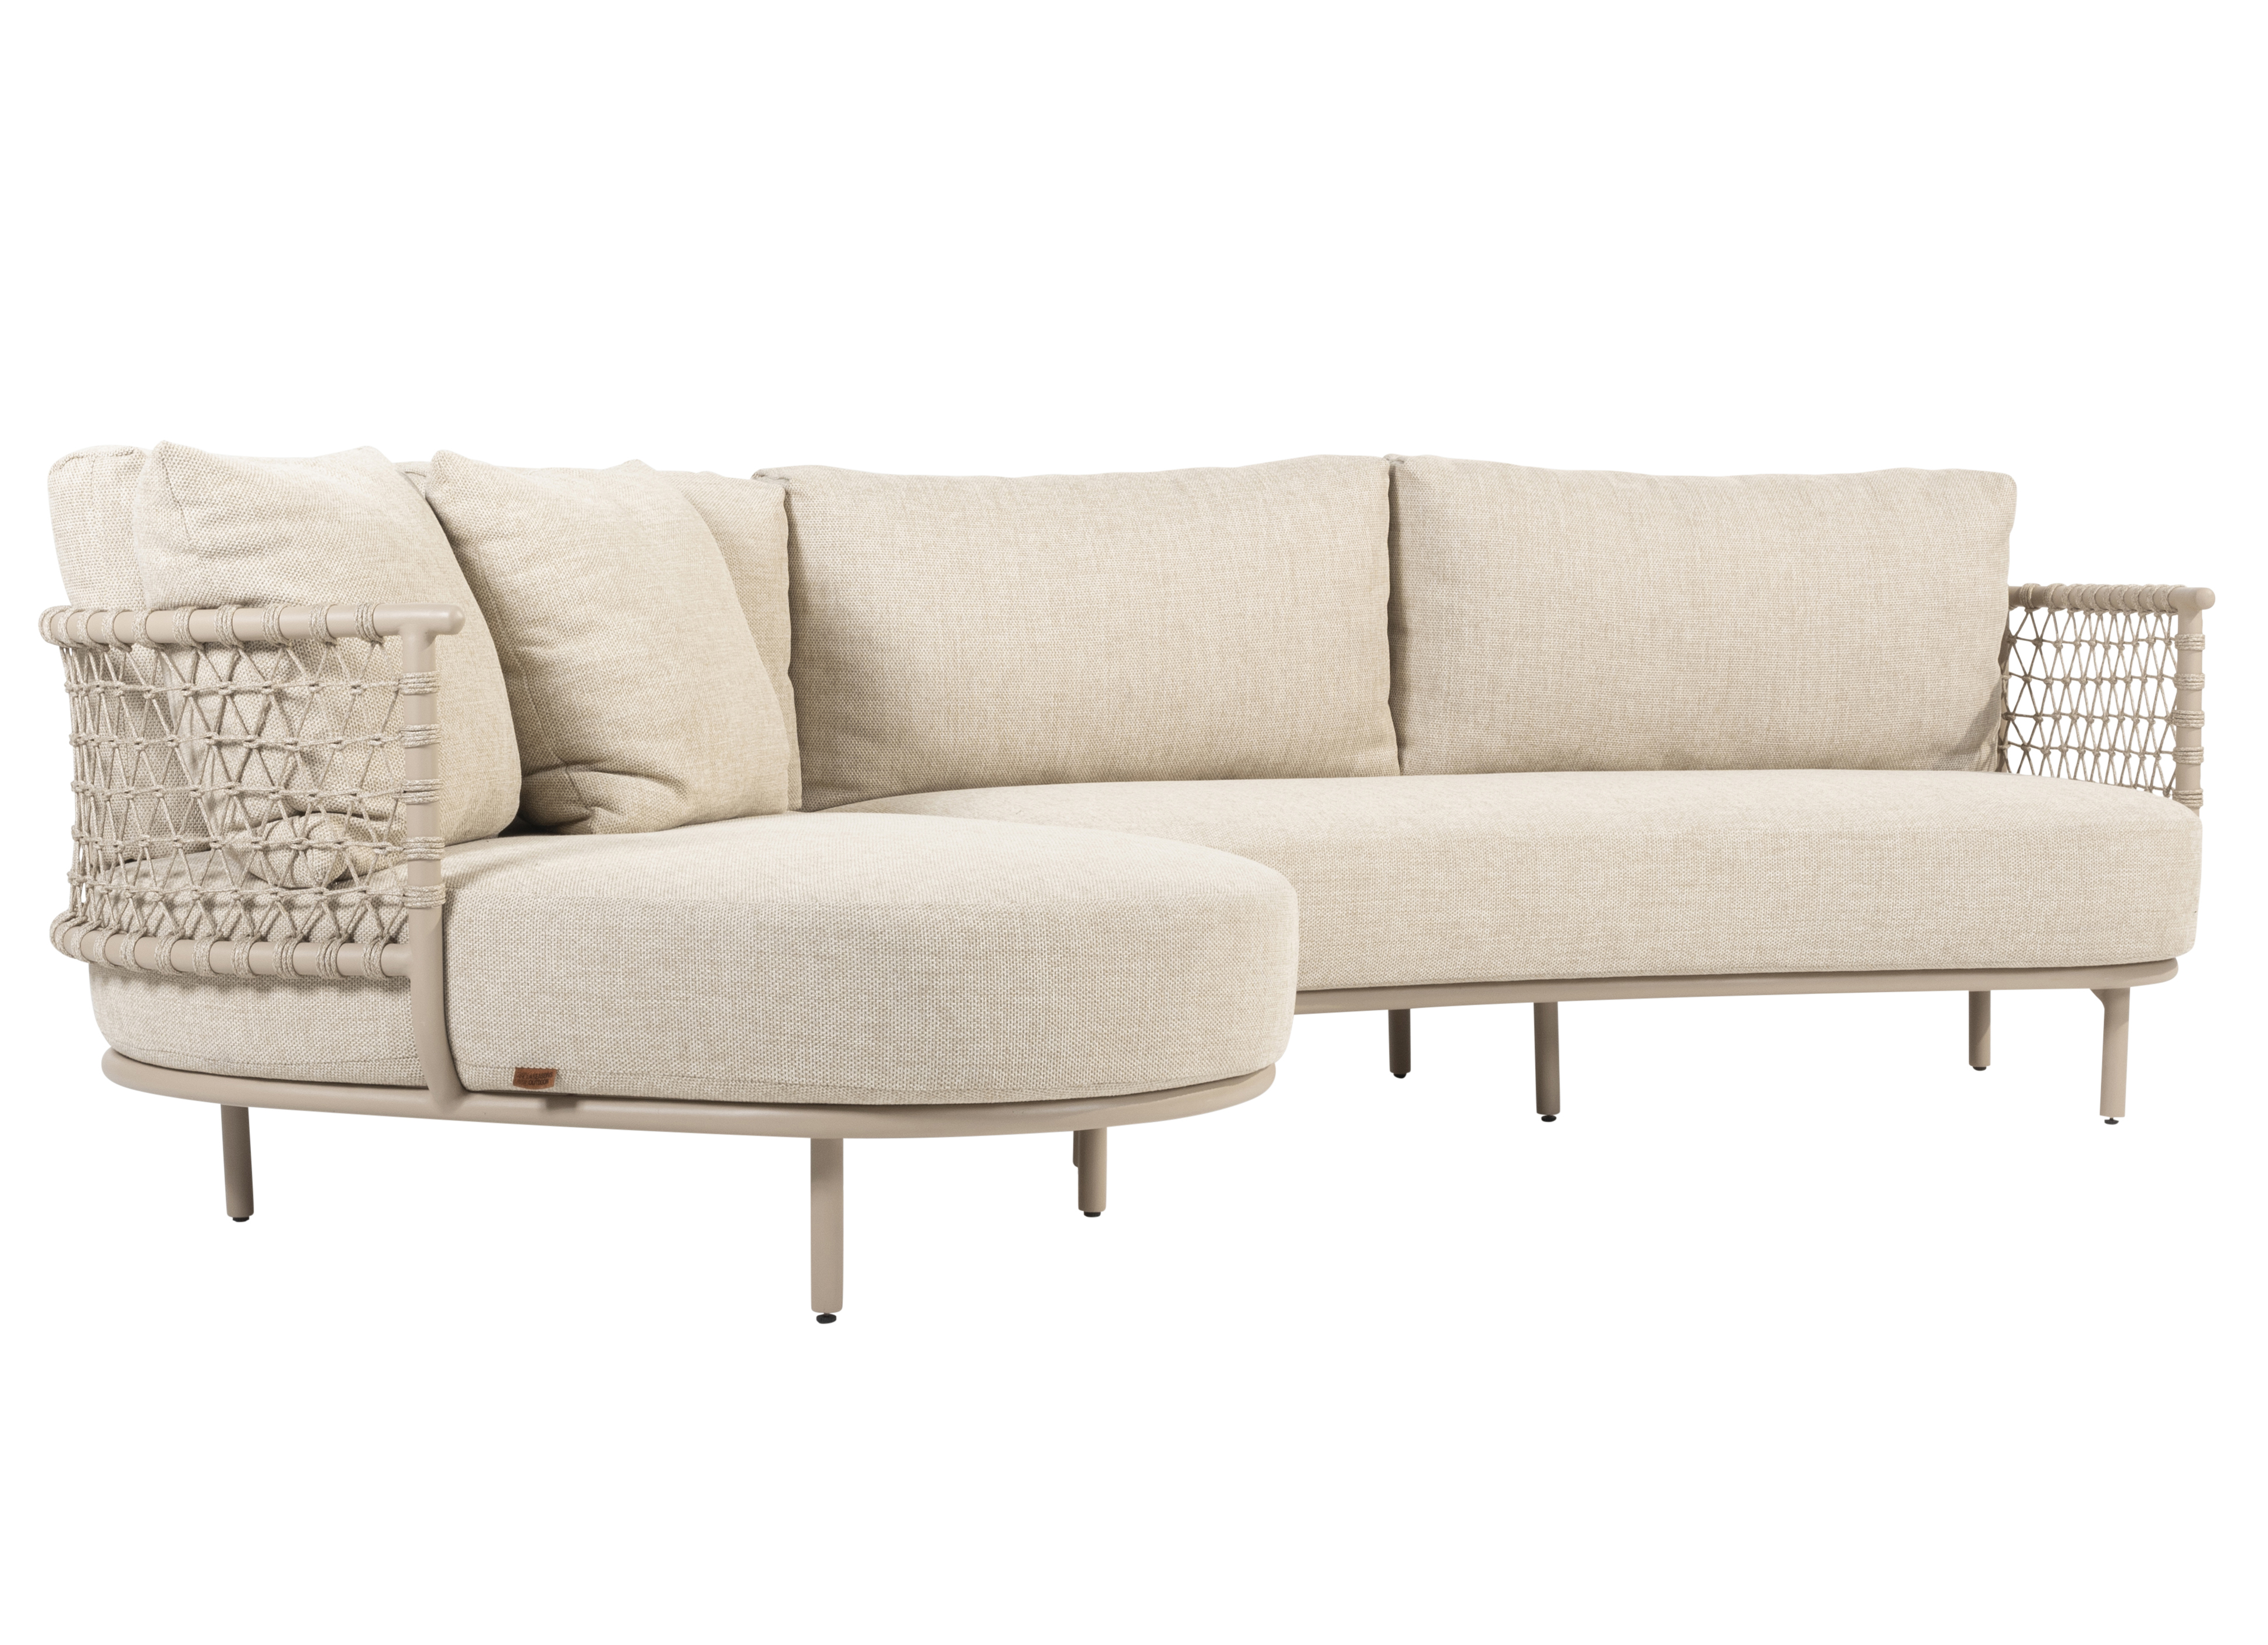 214041-214042_ Sardinia chaise lounge living sofa without table _04